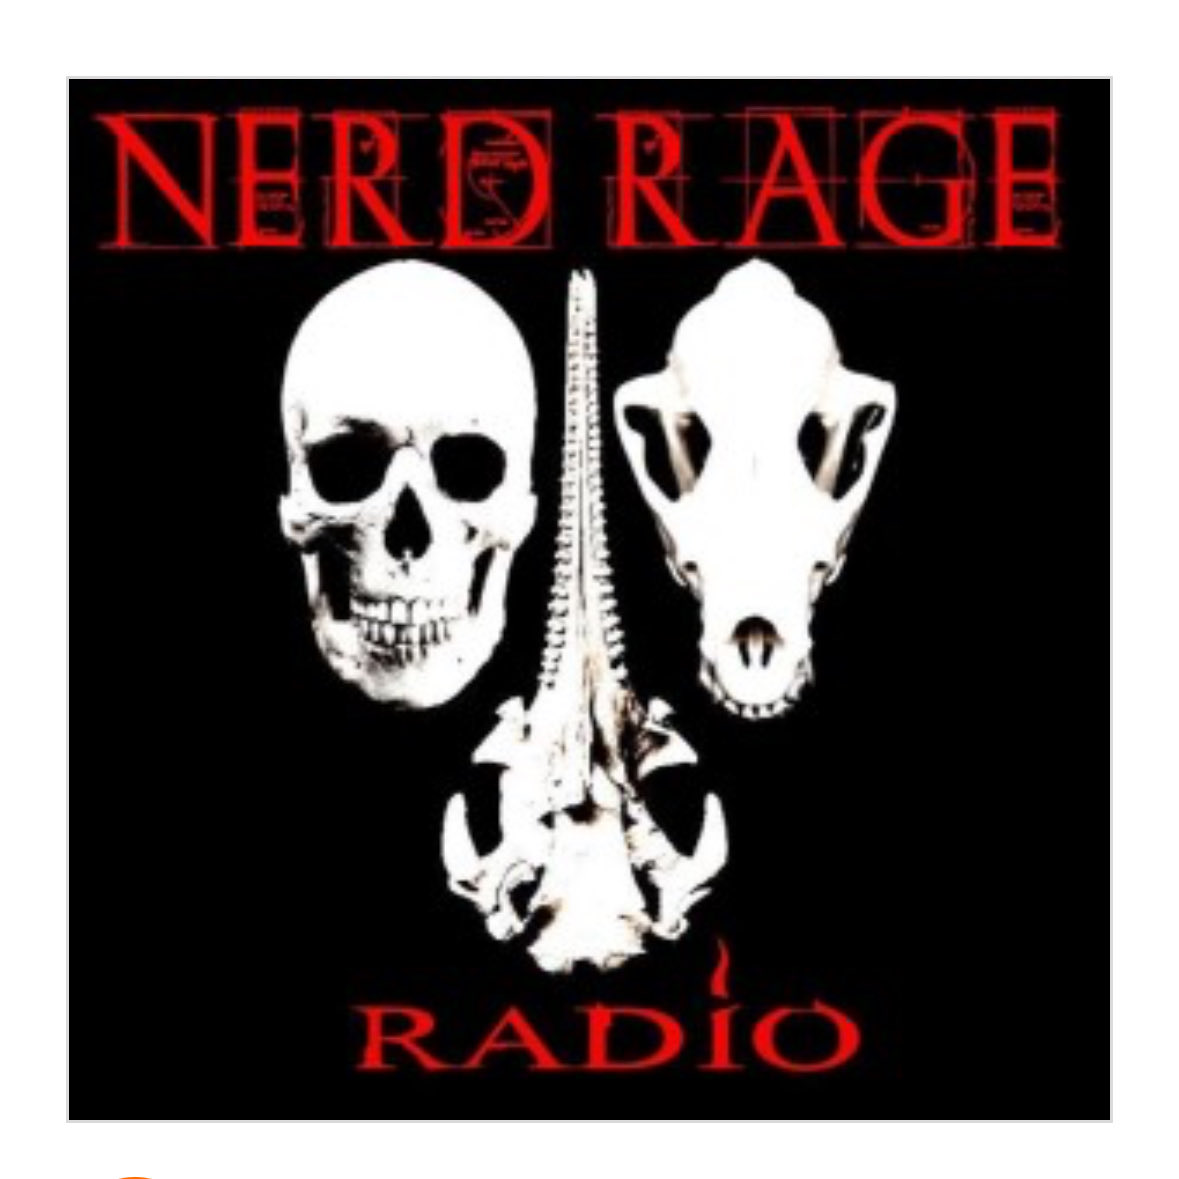 Your fave #podcast w the #NRR crew returns w discussion on #DiCaprioSinatra #SinatraBiopic and the #RockandRollHallofFame as well as #Hasbro and #TMNT news plus the usual #nerdrage nonsense you love #nerdrageradio fanboychannel.podbean.com/e/it-was-so-so…